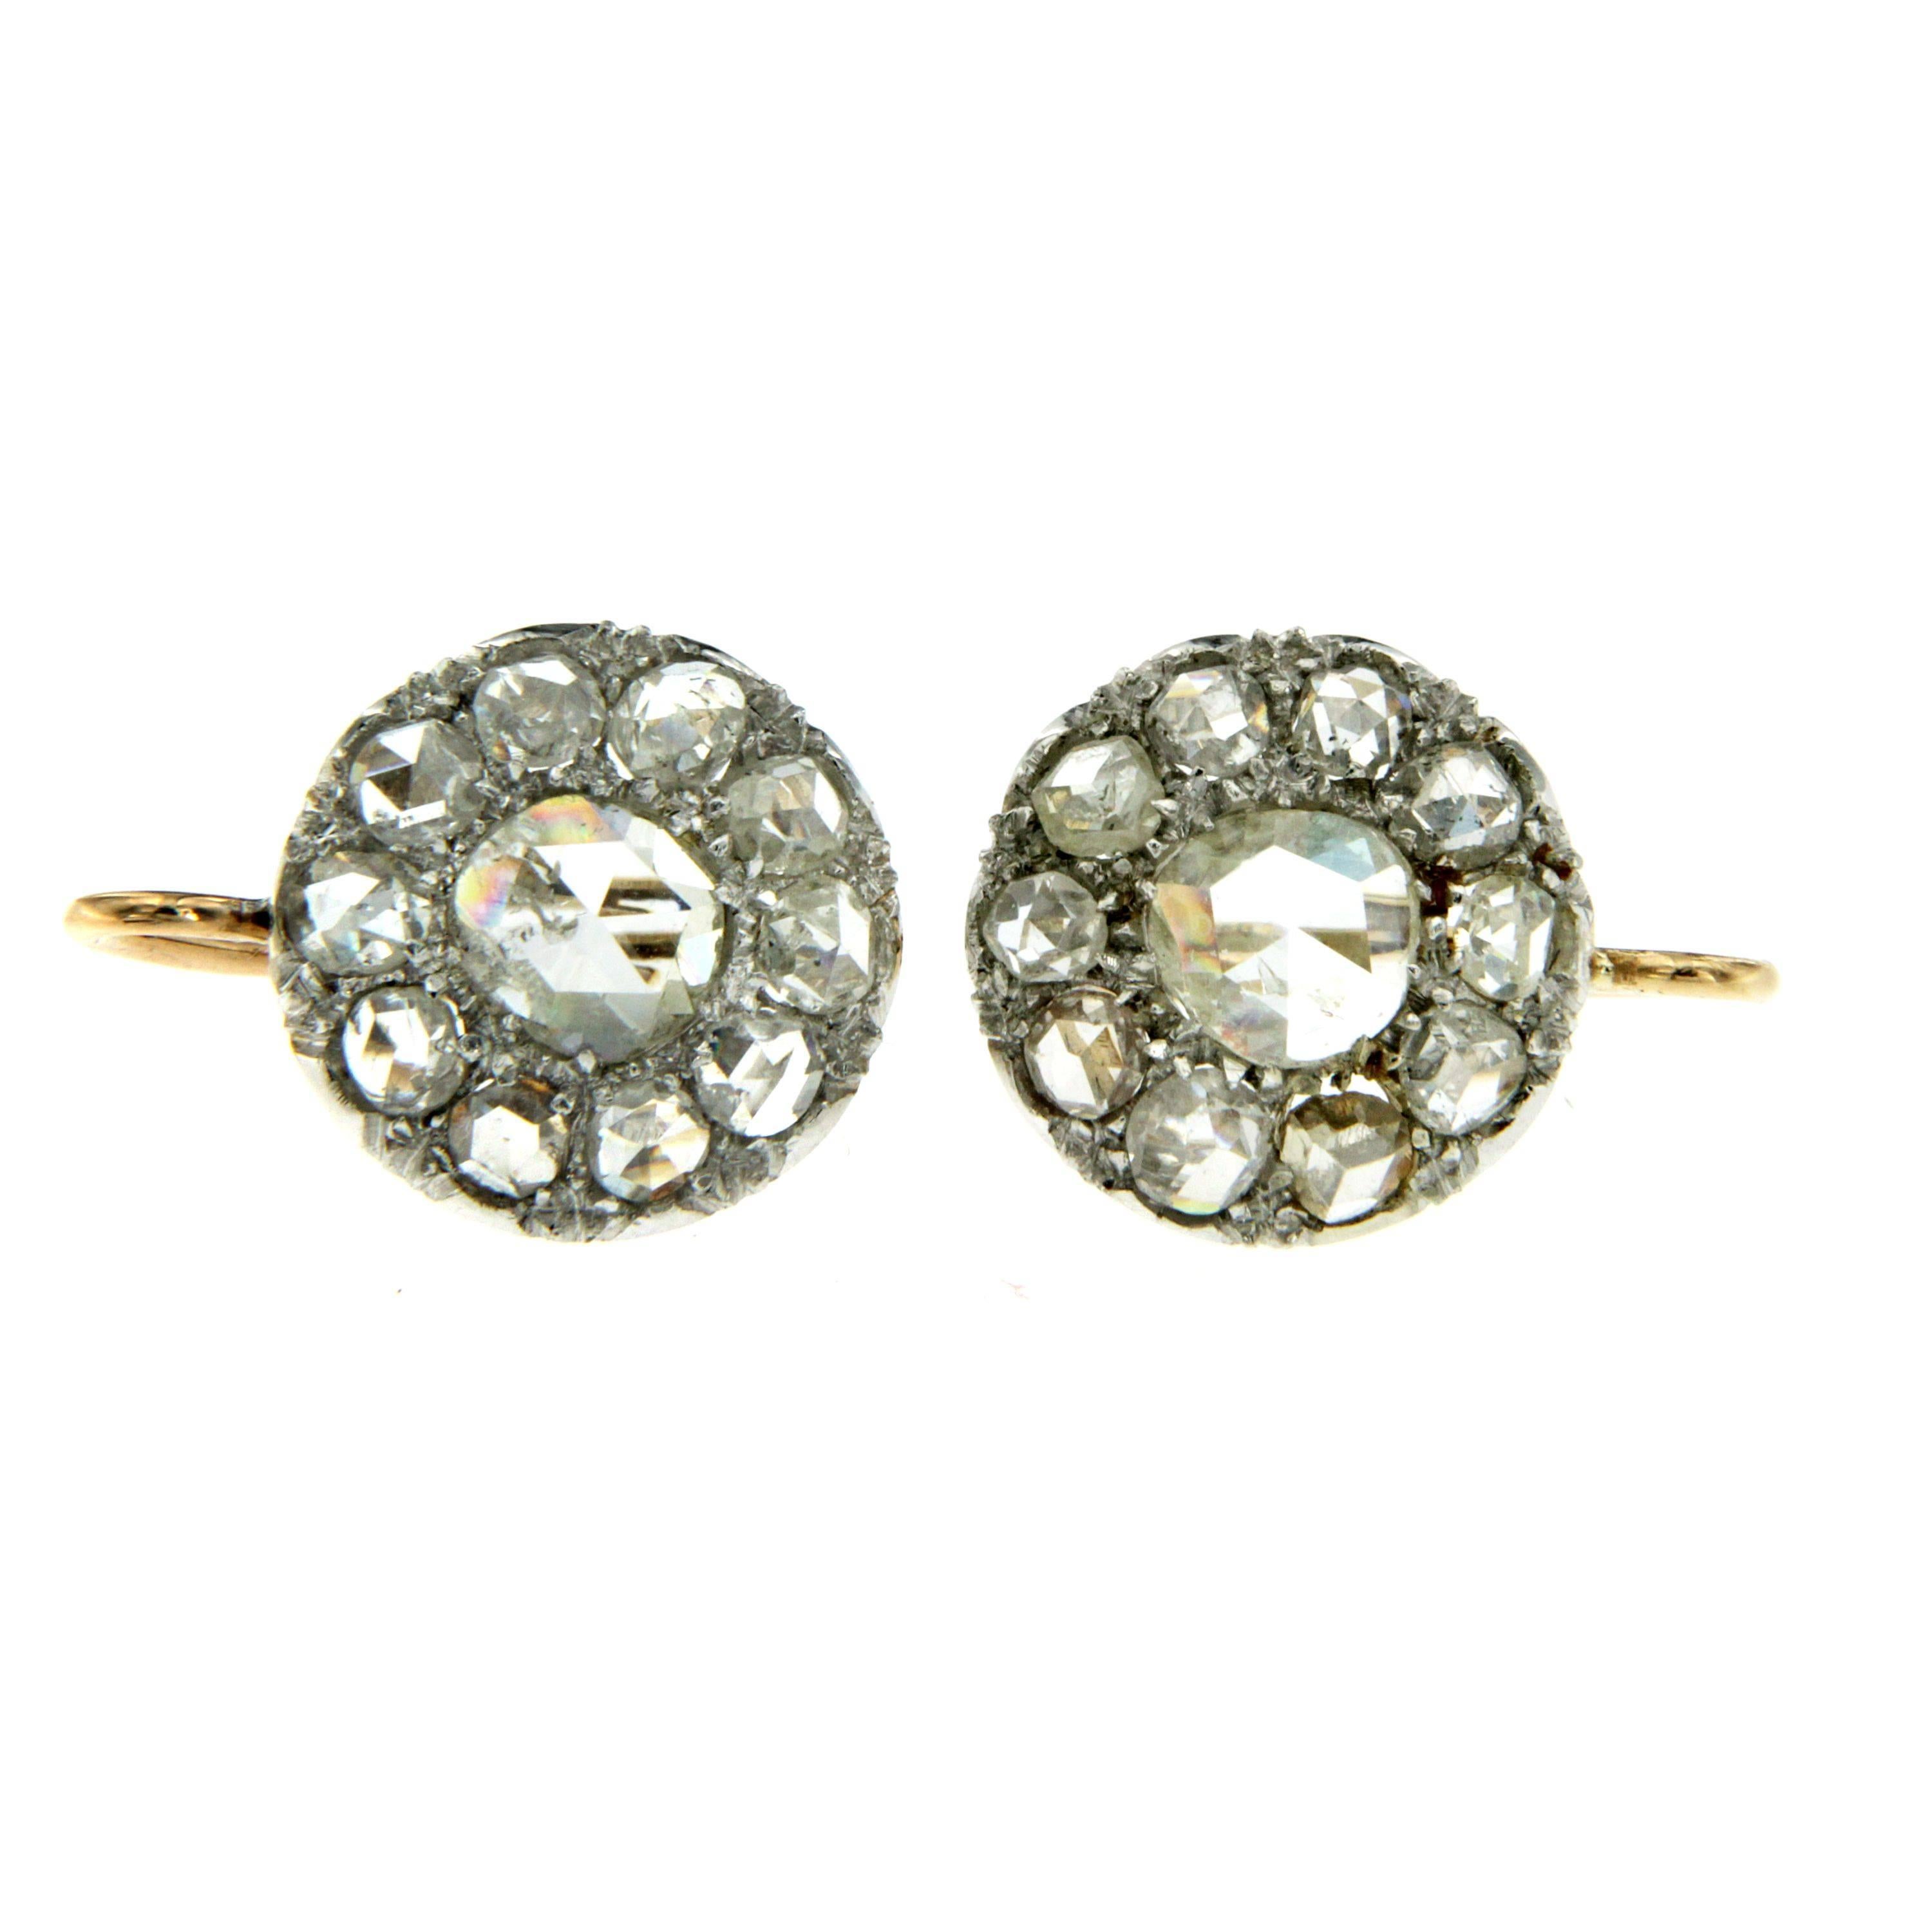 Timeless antique cluster earrings, restored, in excellent conditions.
They are hand crafted in 18k rose gold and set with approx. 0.60 ct of Sparkling Colorless and Large Rose cut Diamonds.

CONDITION: Pre-owned - Excellent 
METAL: 18k Gold
STONE: